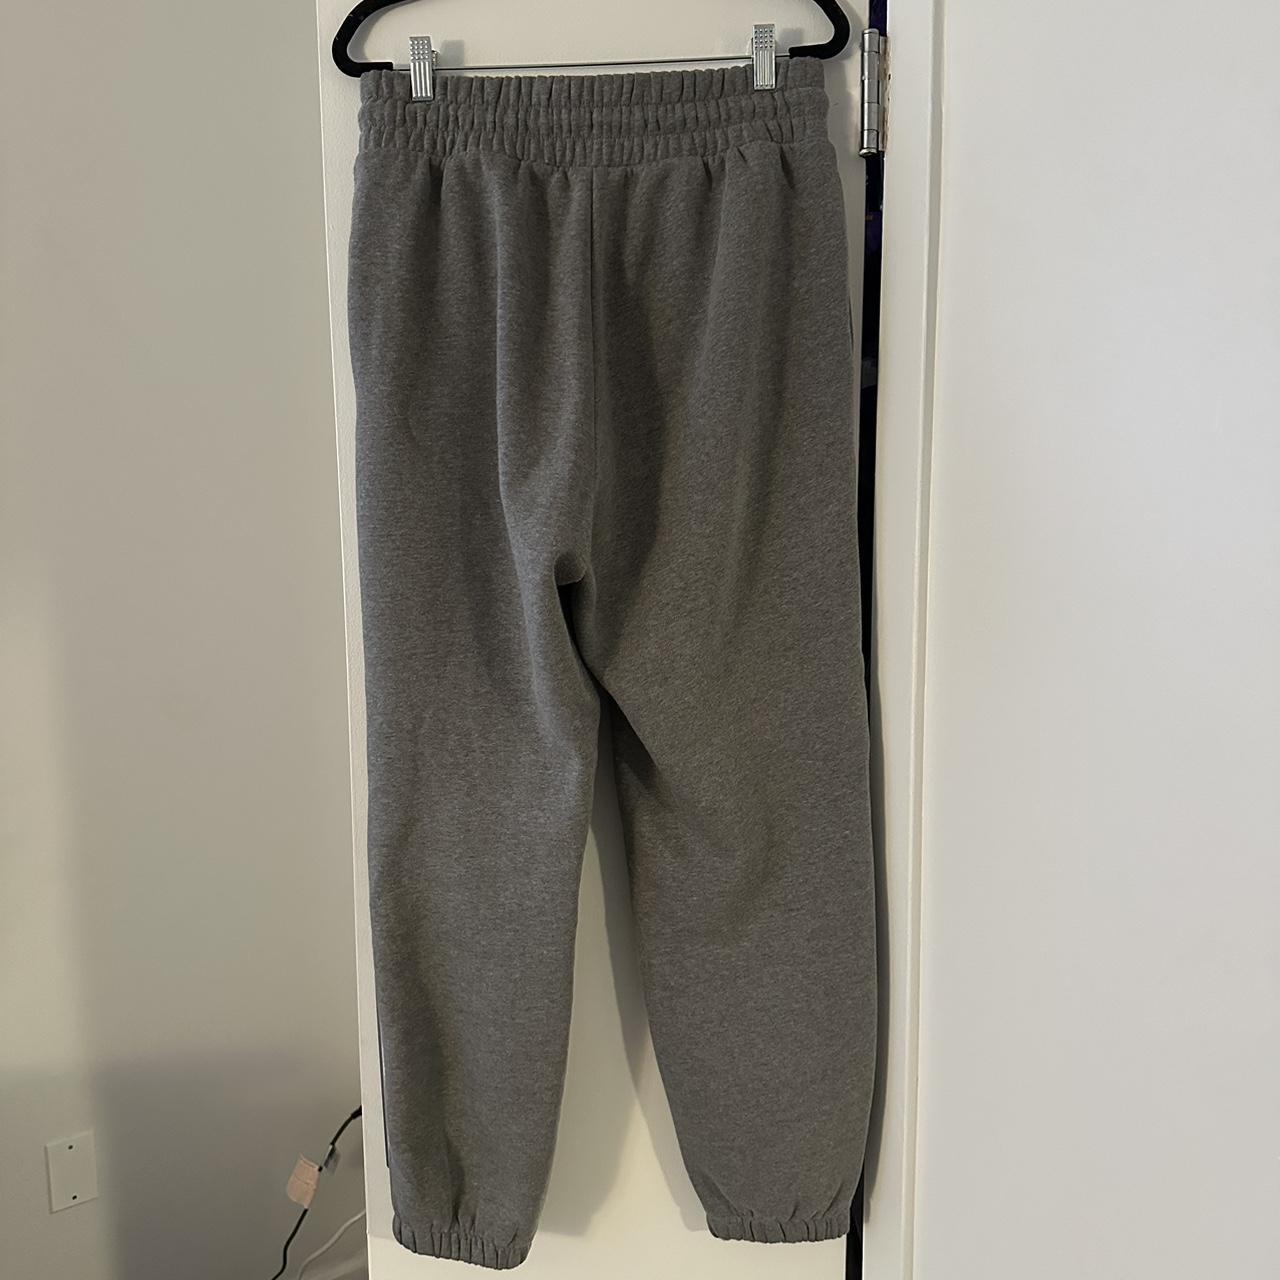 Target/Wild Fable grey sweatpants - size